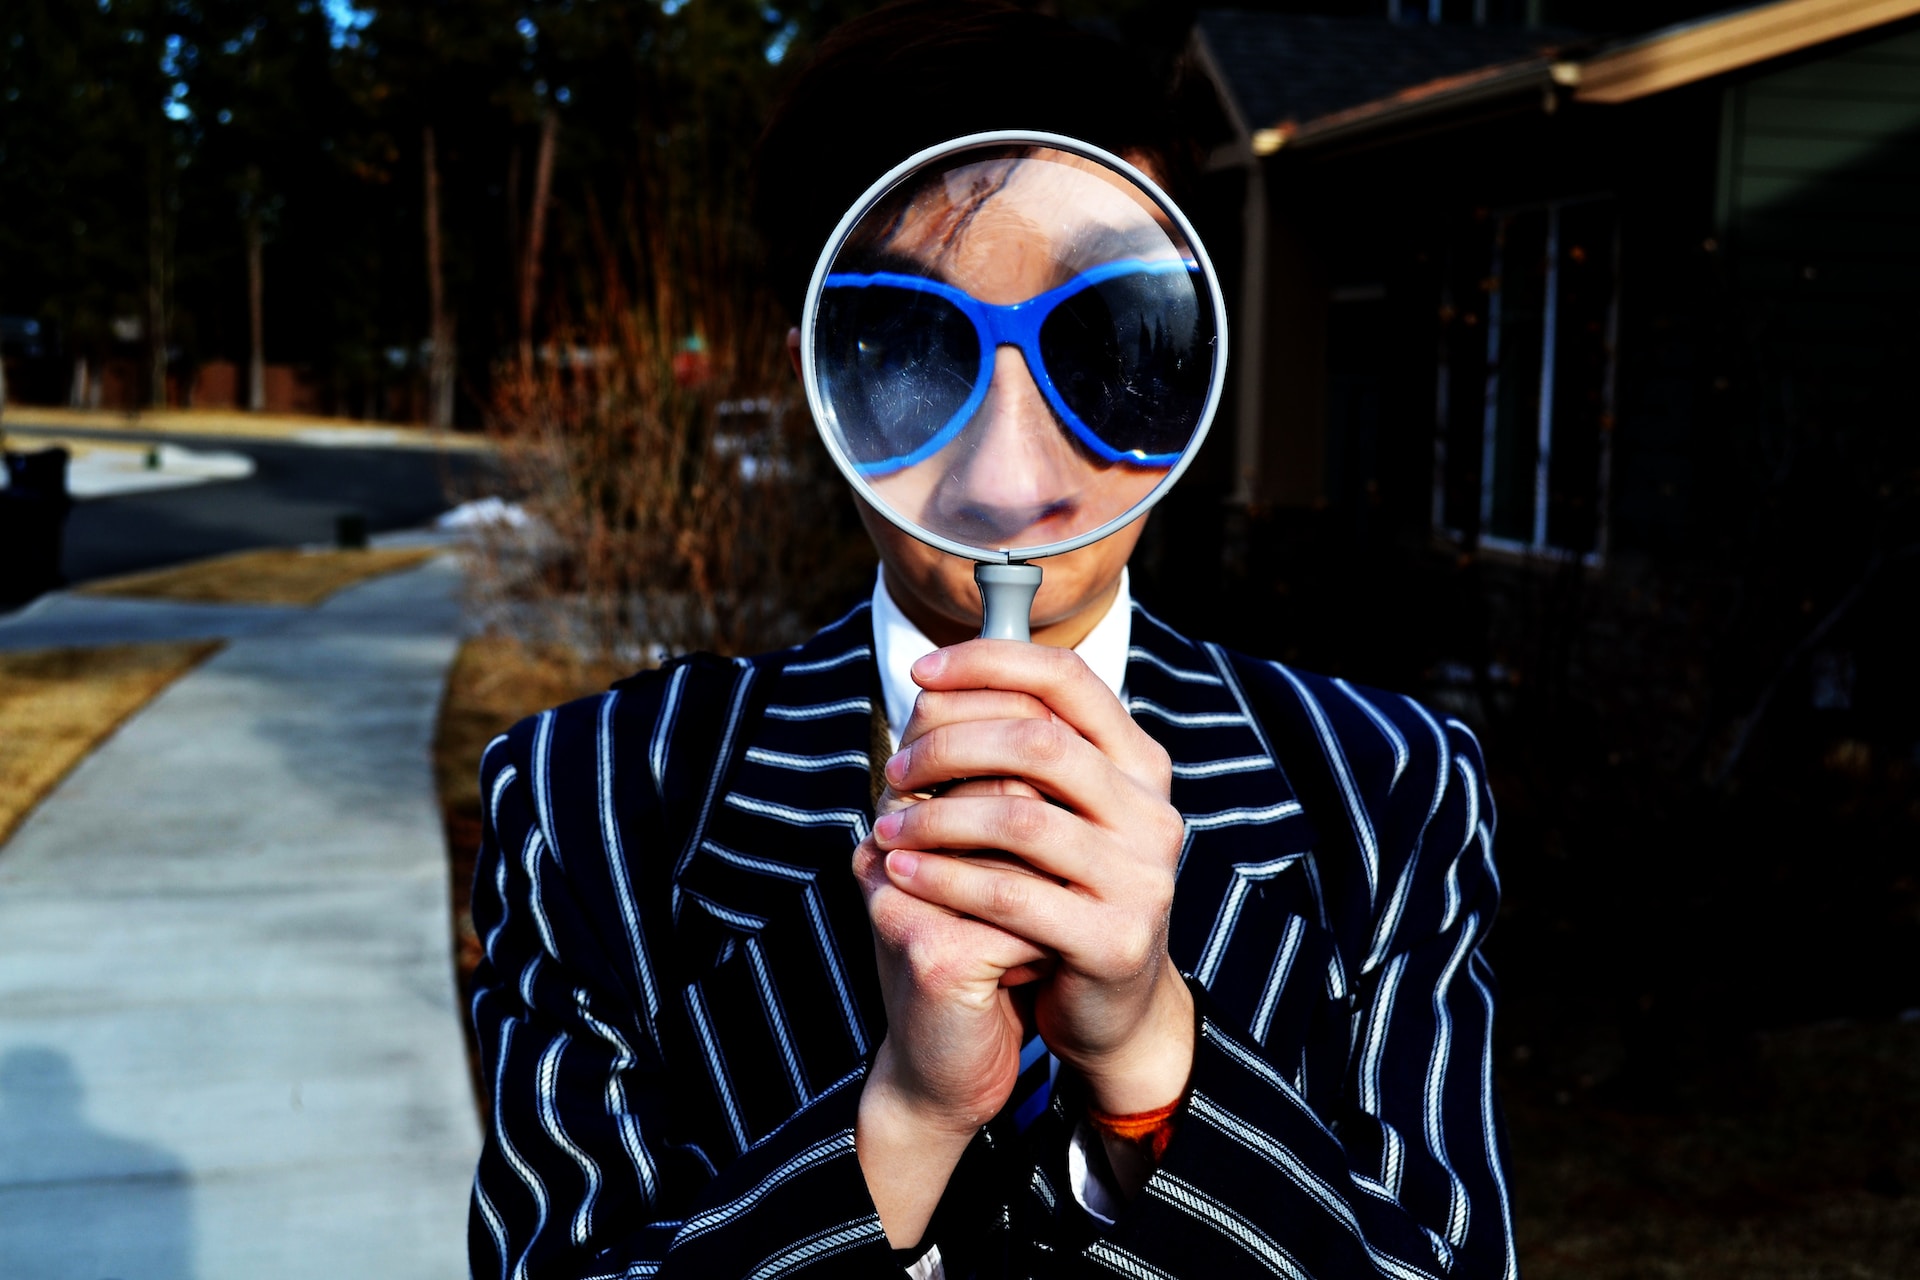 person holding up a magnifying glass wearing a pinstriped suit